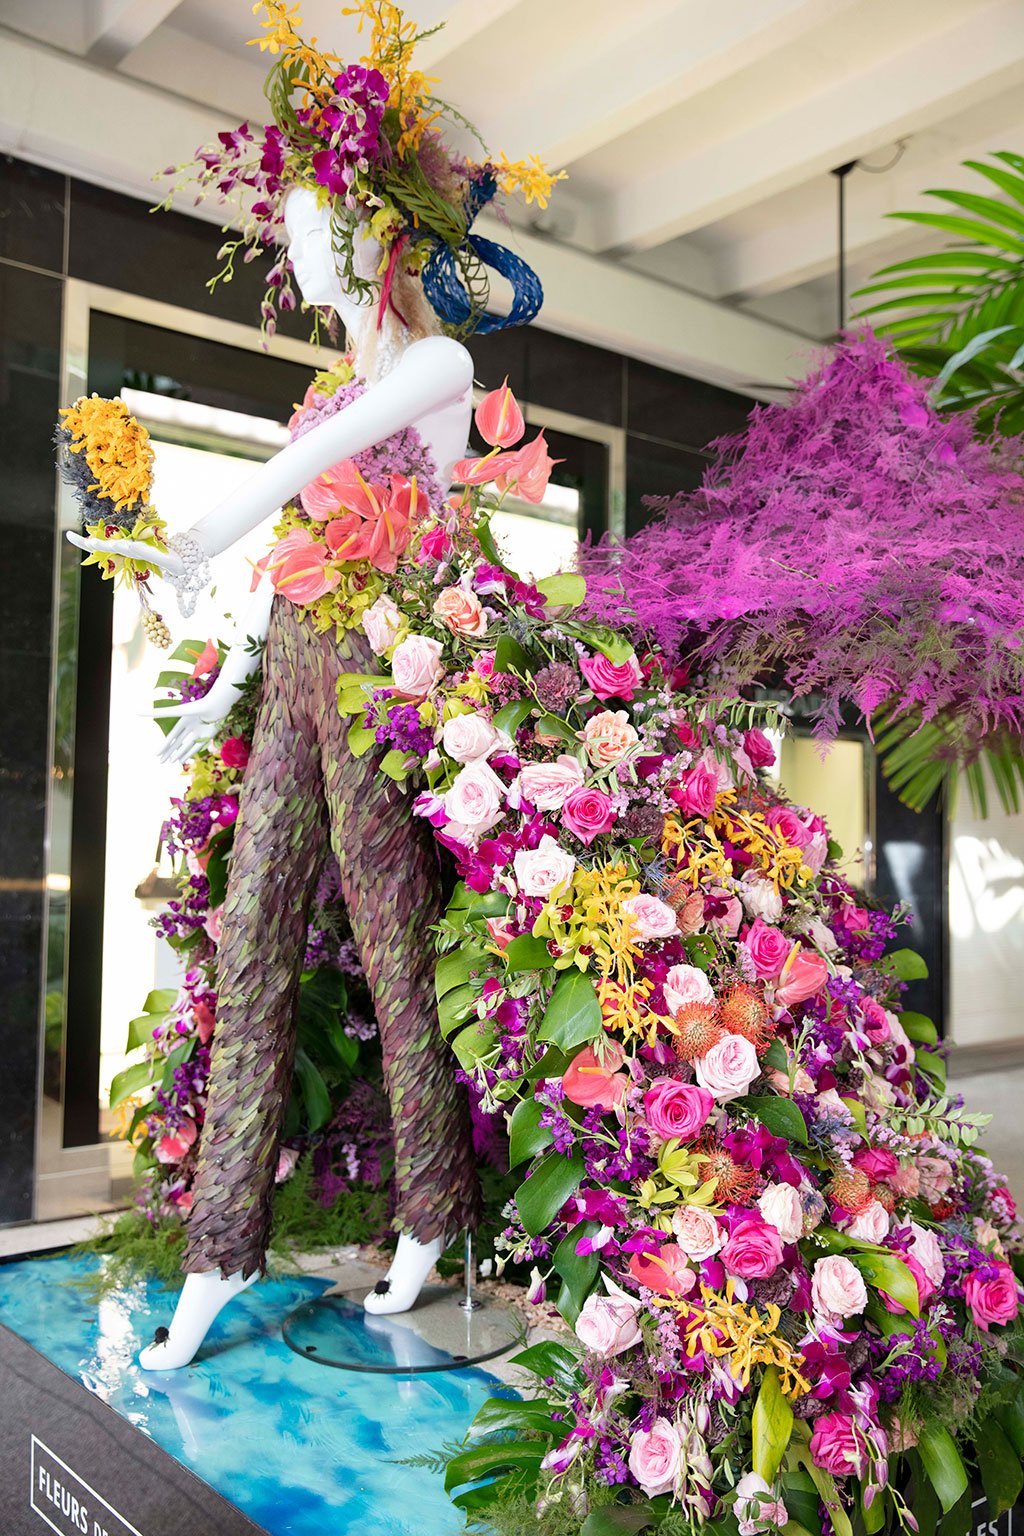 Fisher Island Gives Mannequin Created by Hayal Flowers. Photo by Theodora Richter